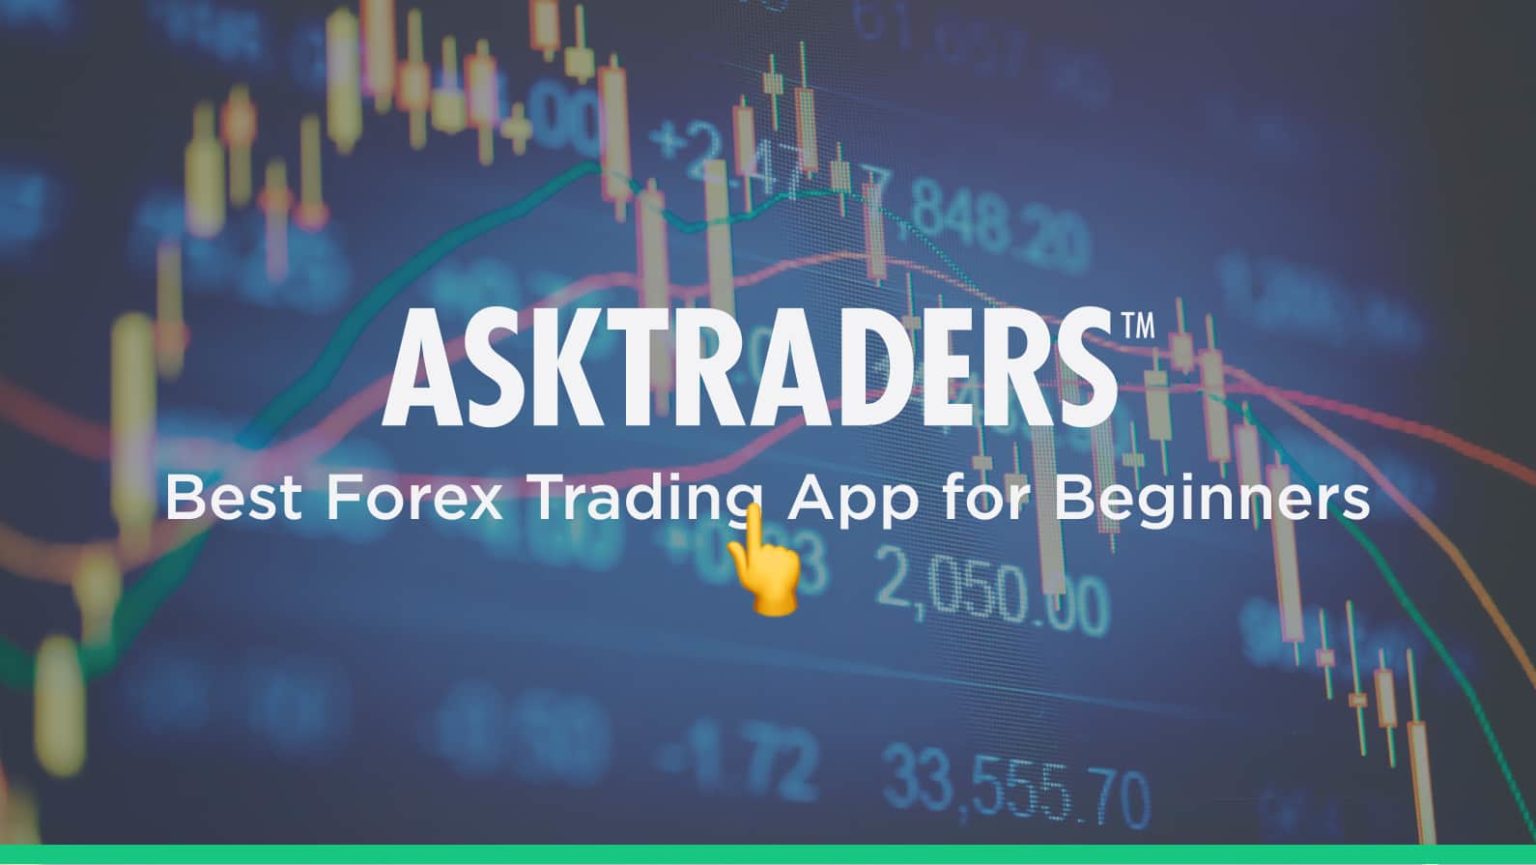 Best Forex Trading App For Beginners 2020 - AskTraders.com